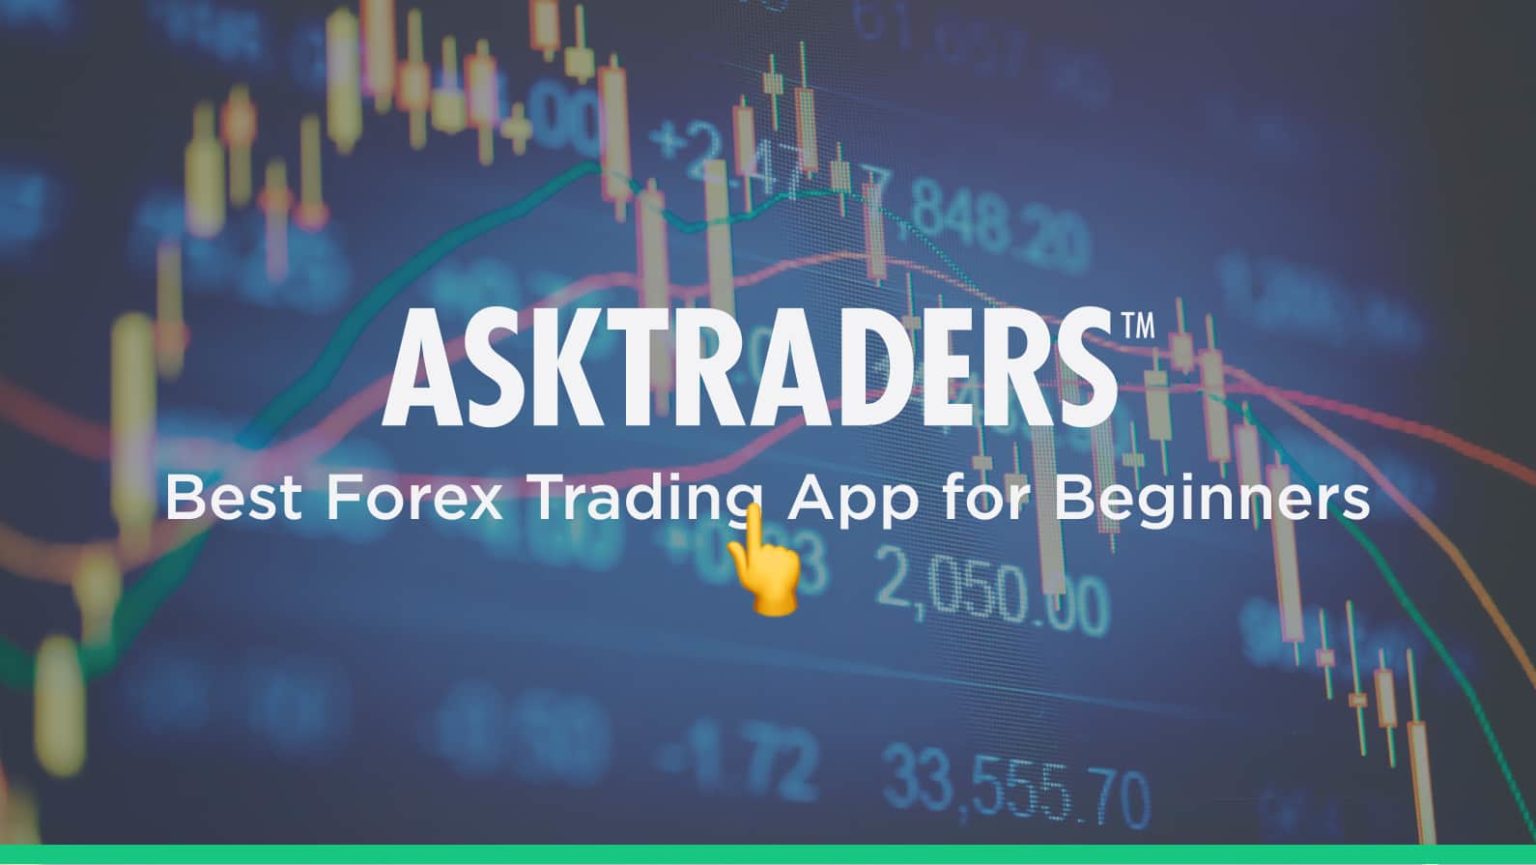 Best Forex Trading App For Beginners 2020 - AskTraders.com